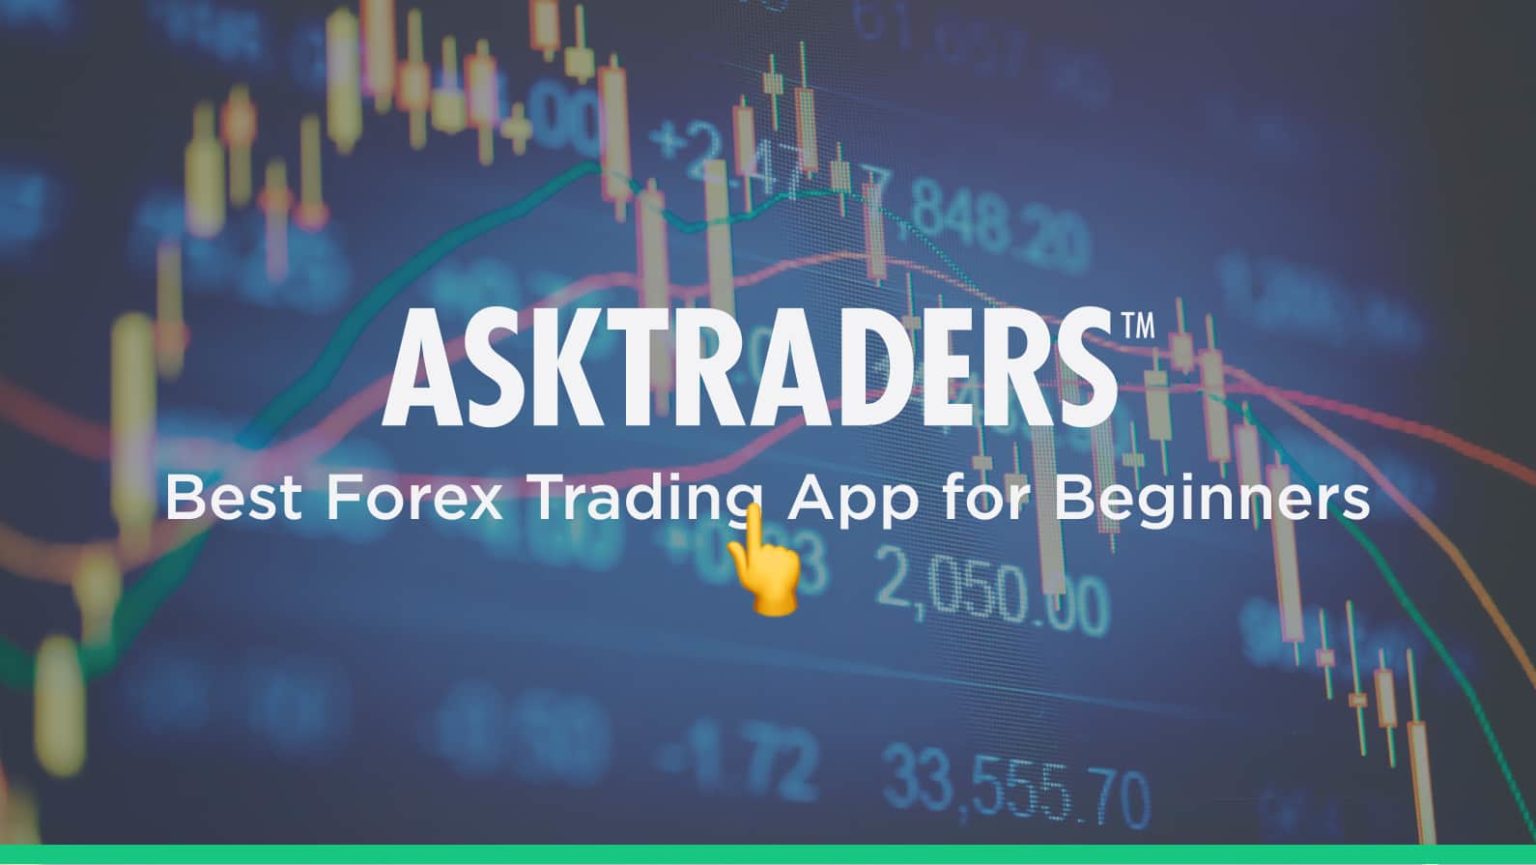 Best Forex Trading App For Beginners 2020 - AskTraders.com